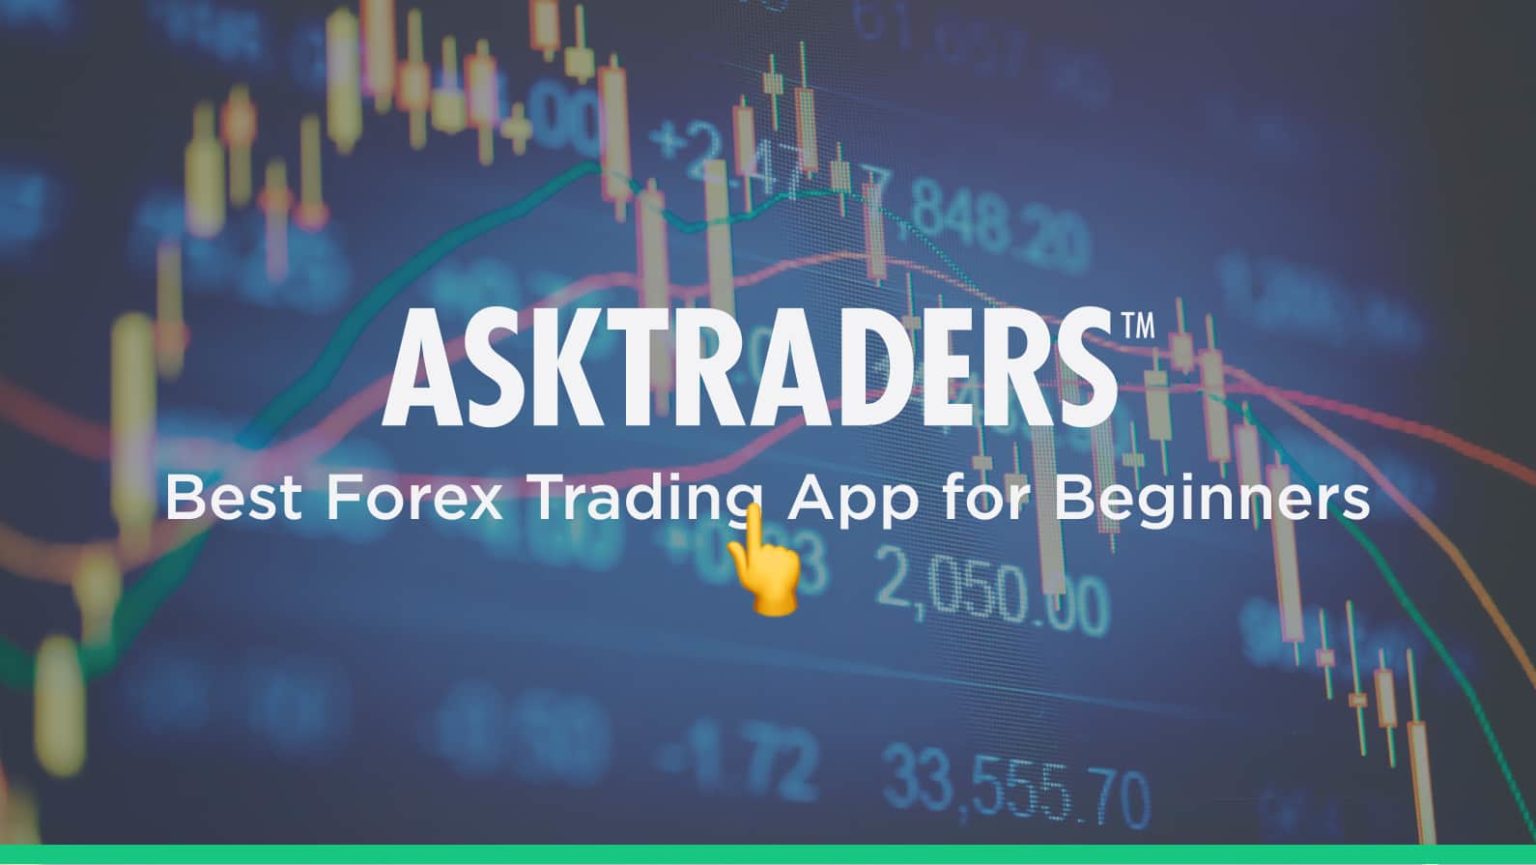 Best Forex Trading App For Beginners 2020 - AskTraders.com